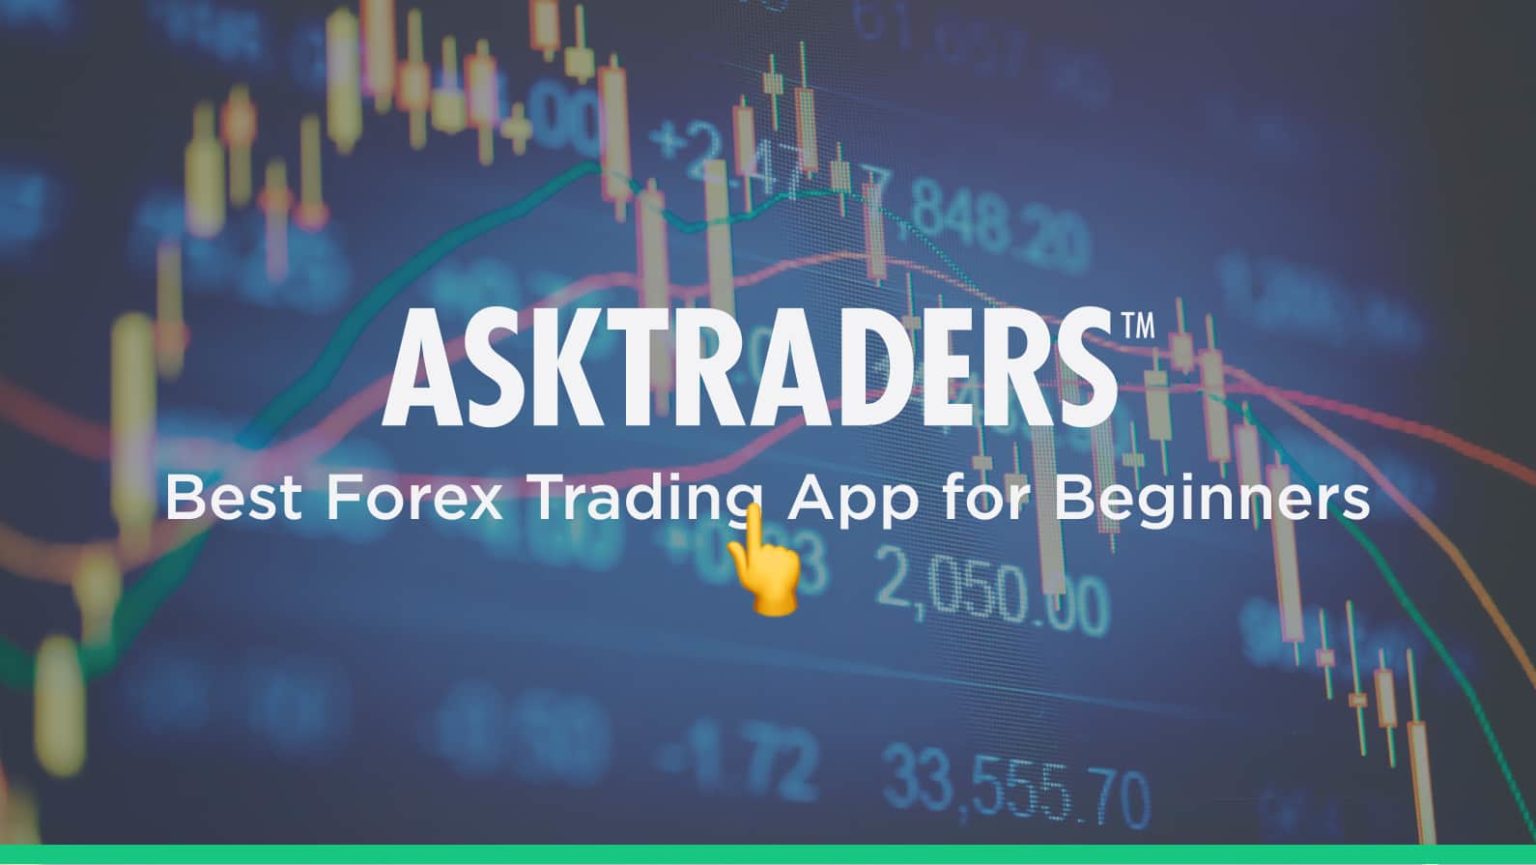 Best Forex Trading App For Beginners 2020 - AskTraders.com